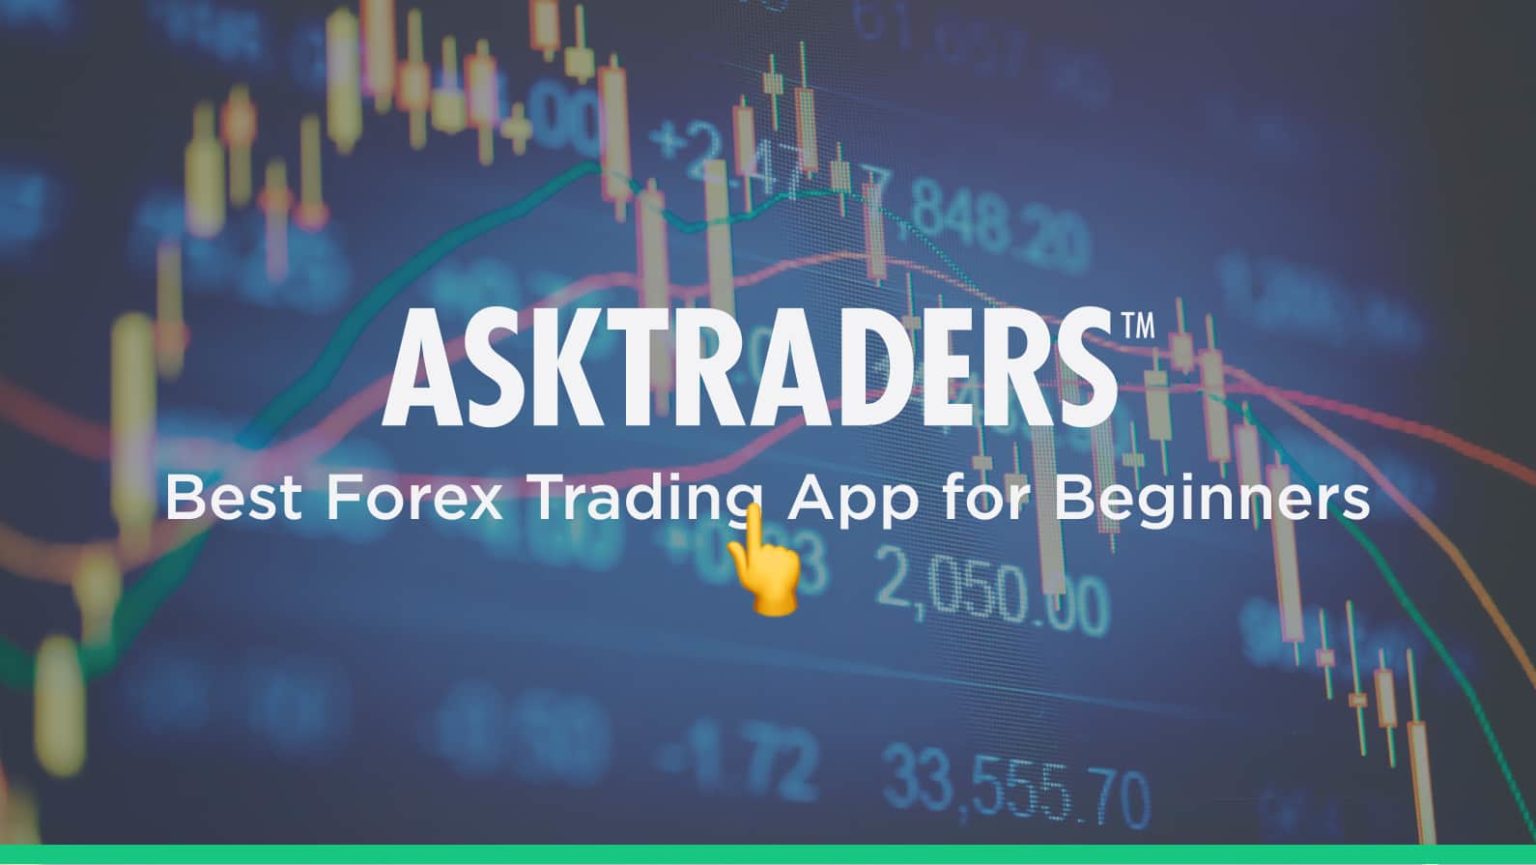 Best Forex Trading App For Beginners 2020 - AskTraders.com